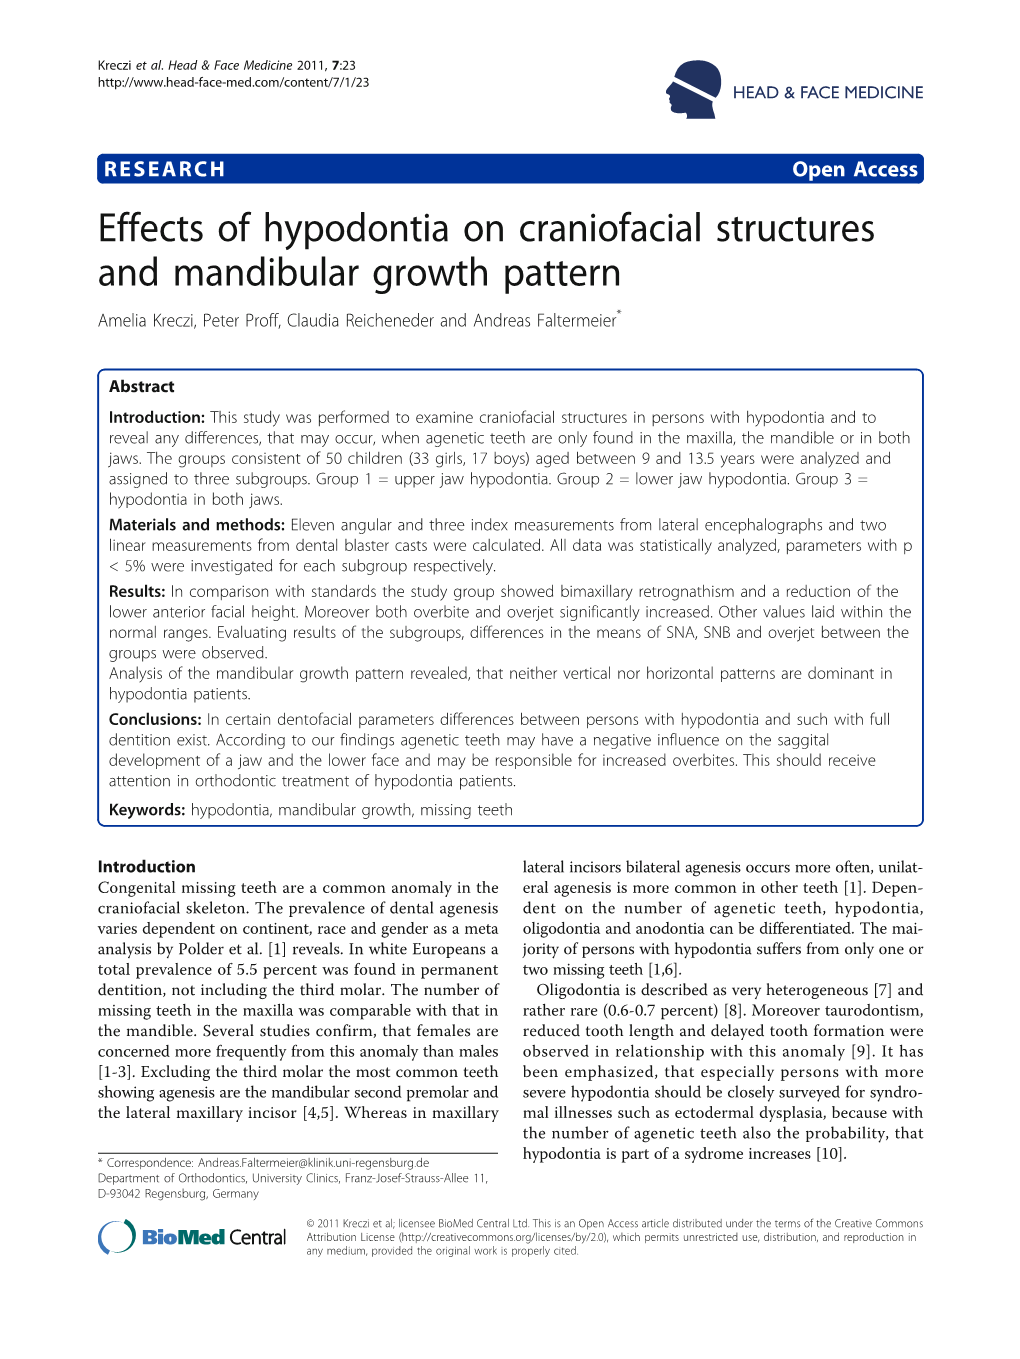 Effects of Hypodontia on Craniofacial Structures and Mandibular Growth Pattern Amelia Kreczi, Peter Proff, Claudia Reicheneder and Andreas Faltermeier*